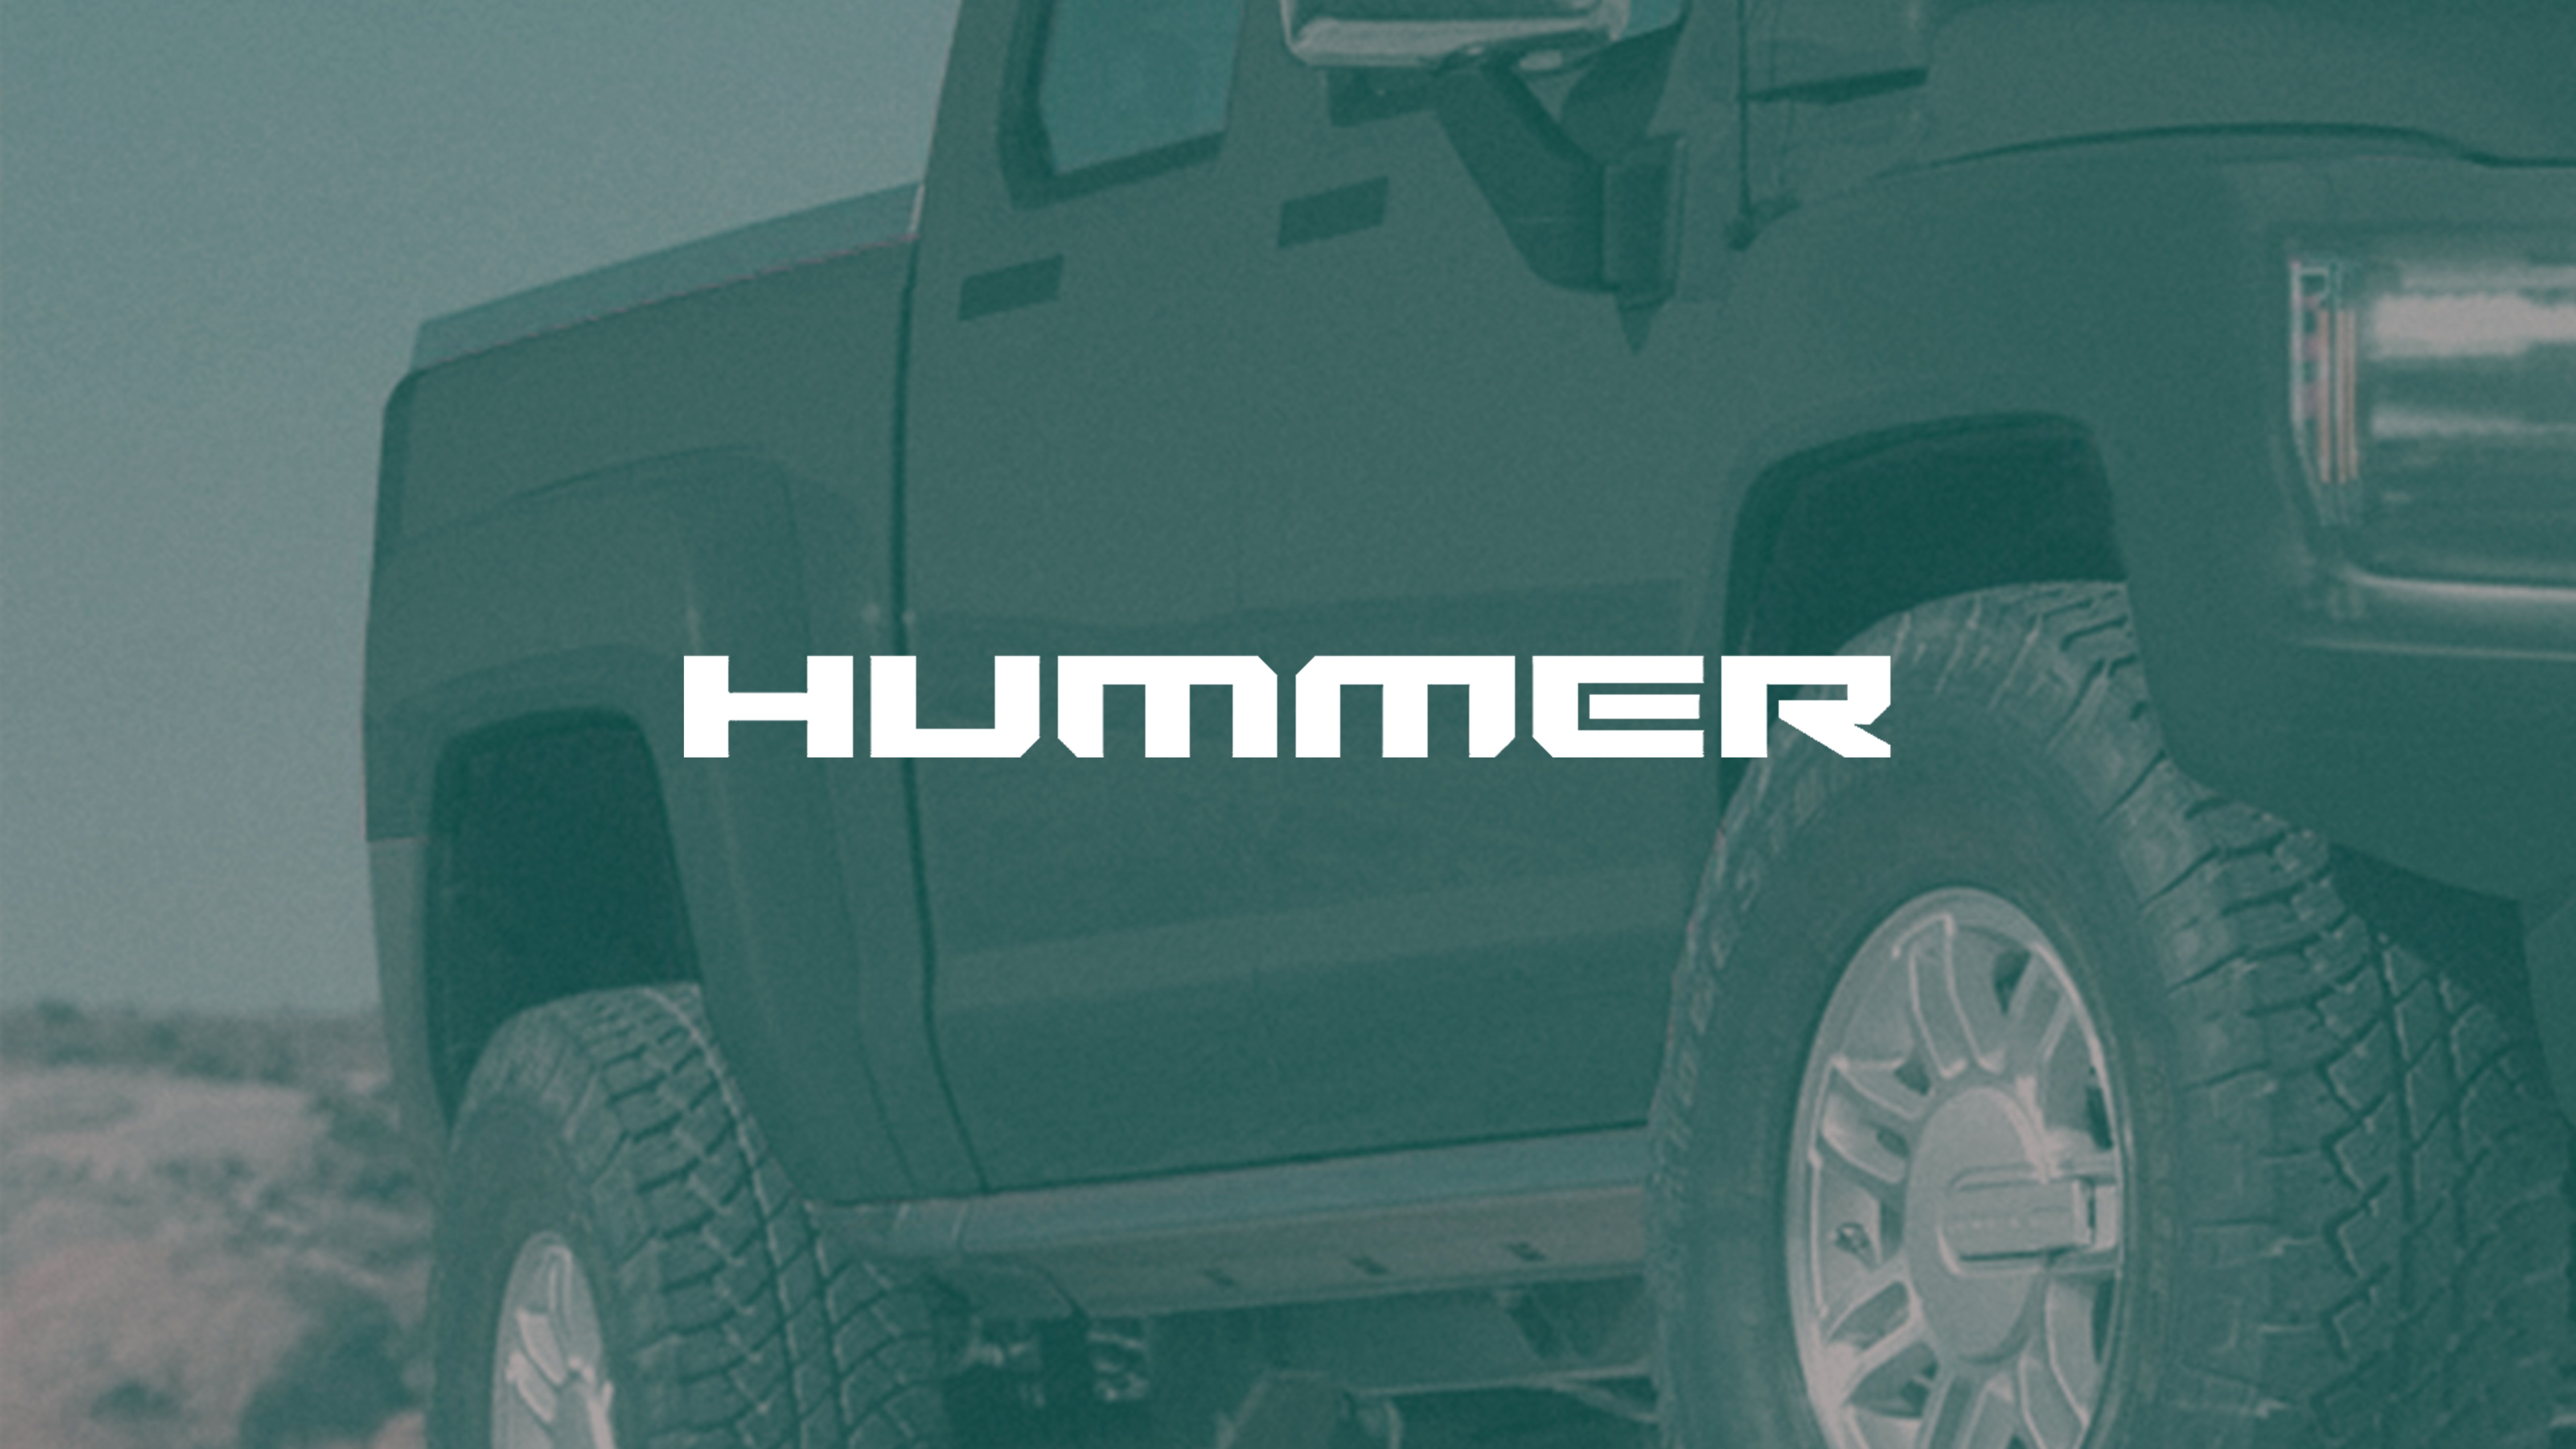 Hummer parts guy needs a new logo or redesign | Logo design contest |  99designs